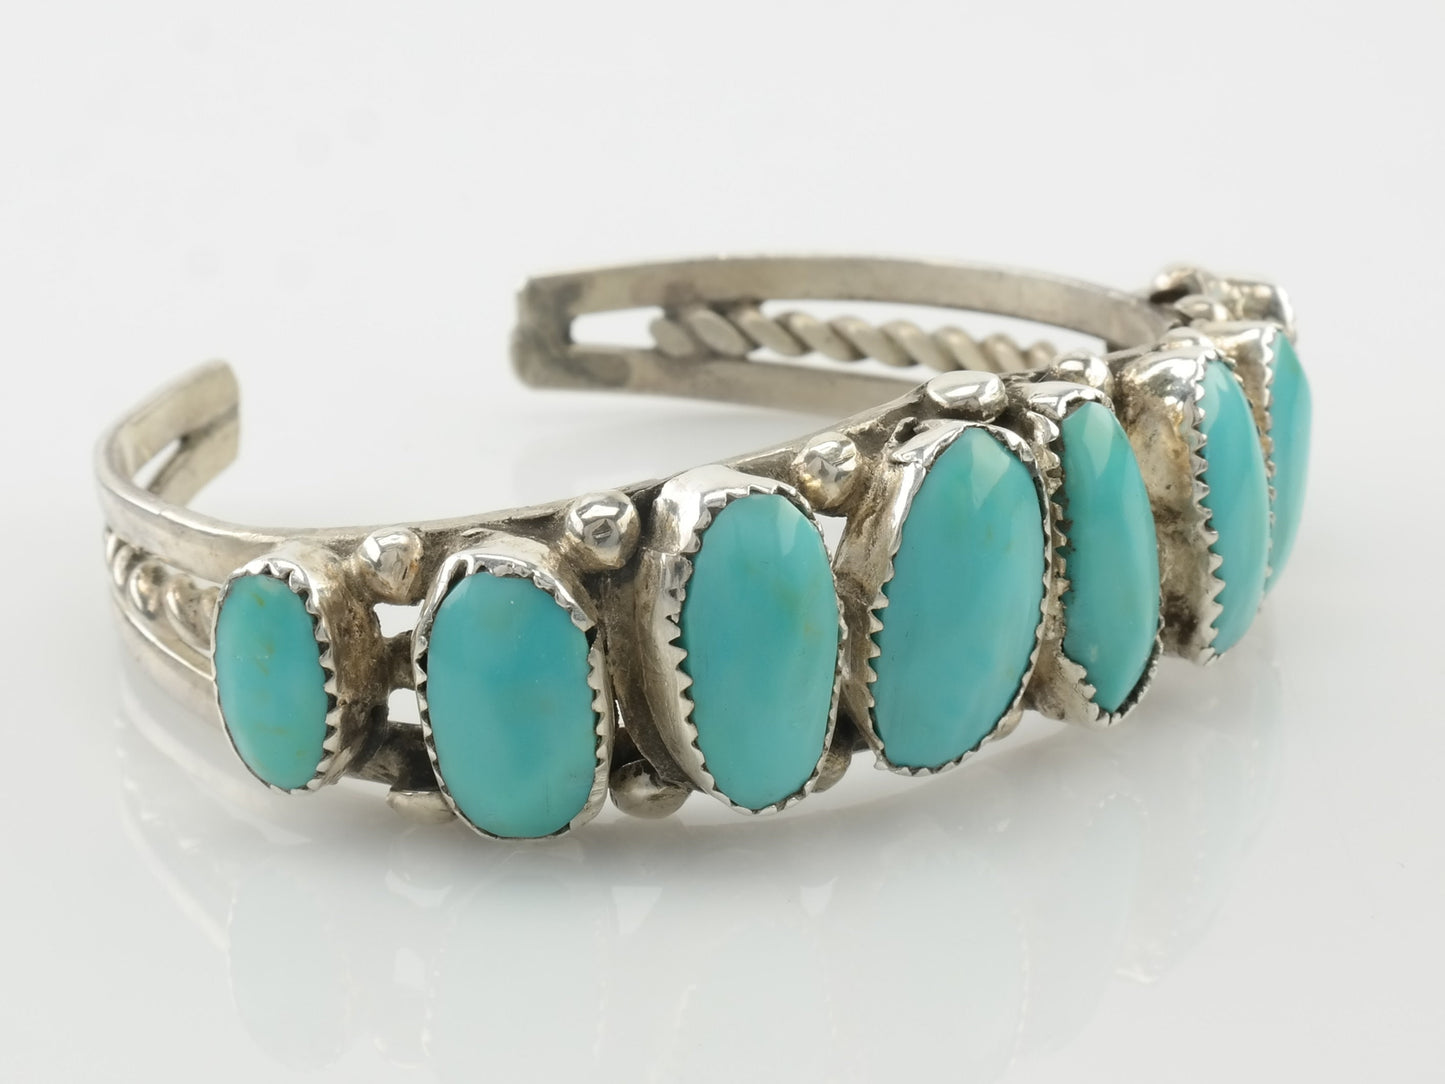 Native American Sterling Silver Turquoise Row Cuff Bracelet Sleeping Beauty